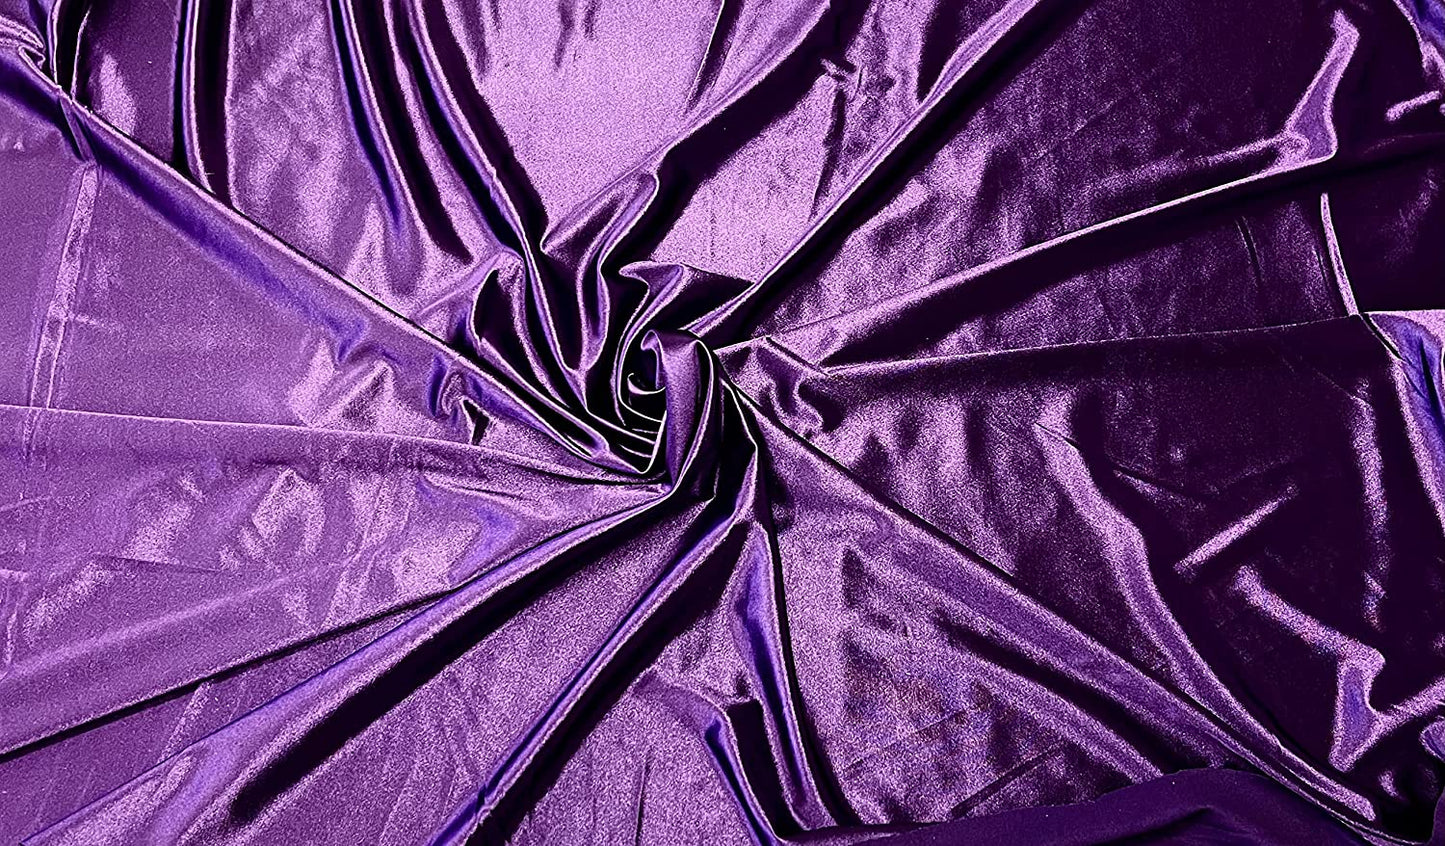 Deluxe Shiny Polyester Spandex Stretch Fabric (1 Yard, Plum)